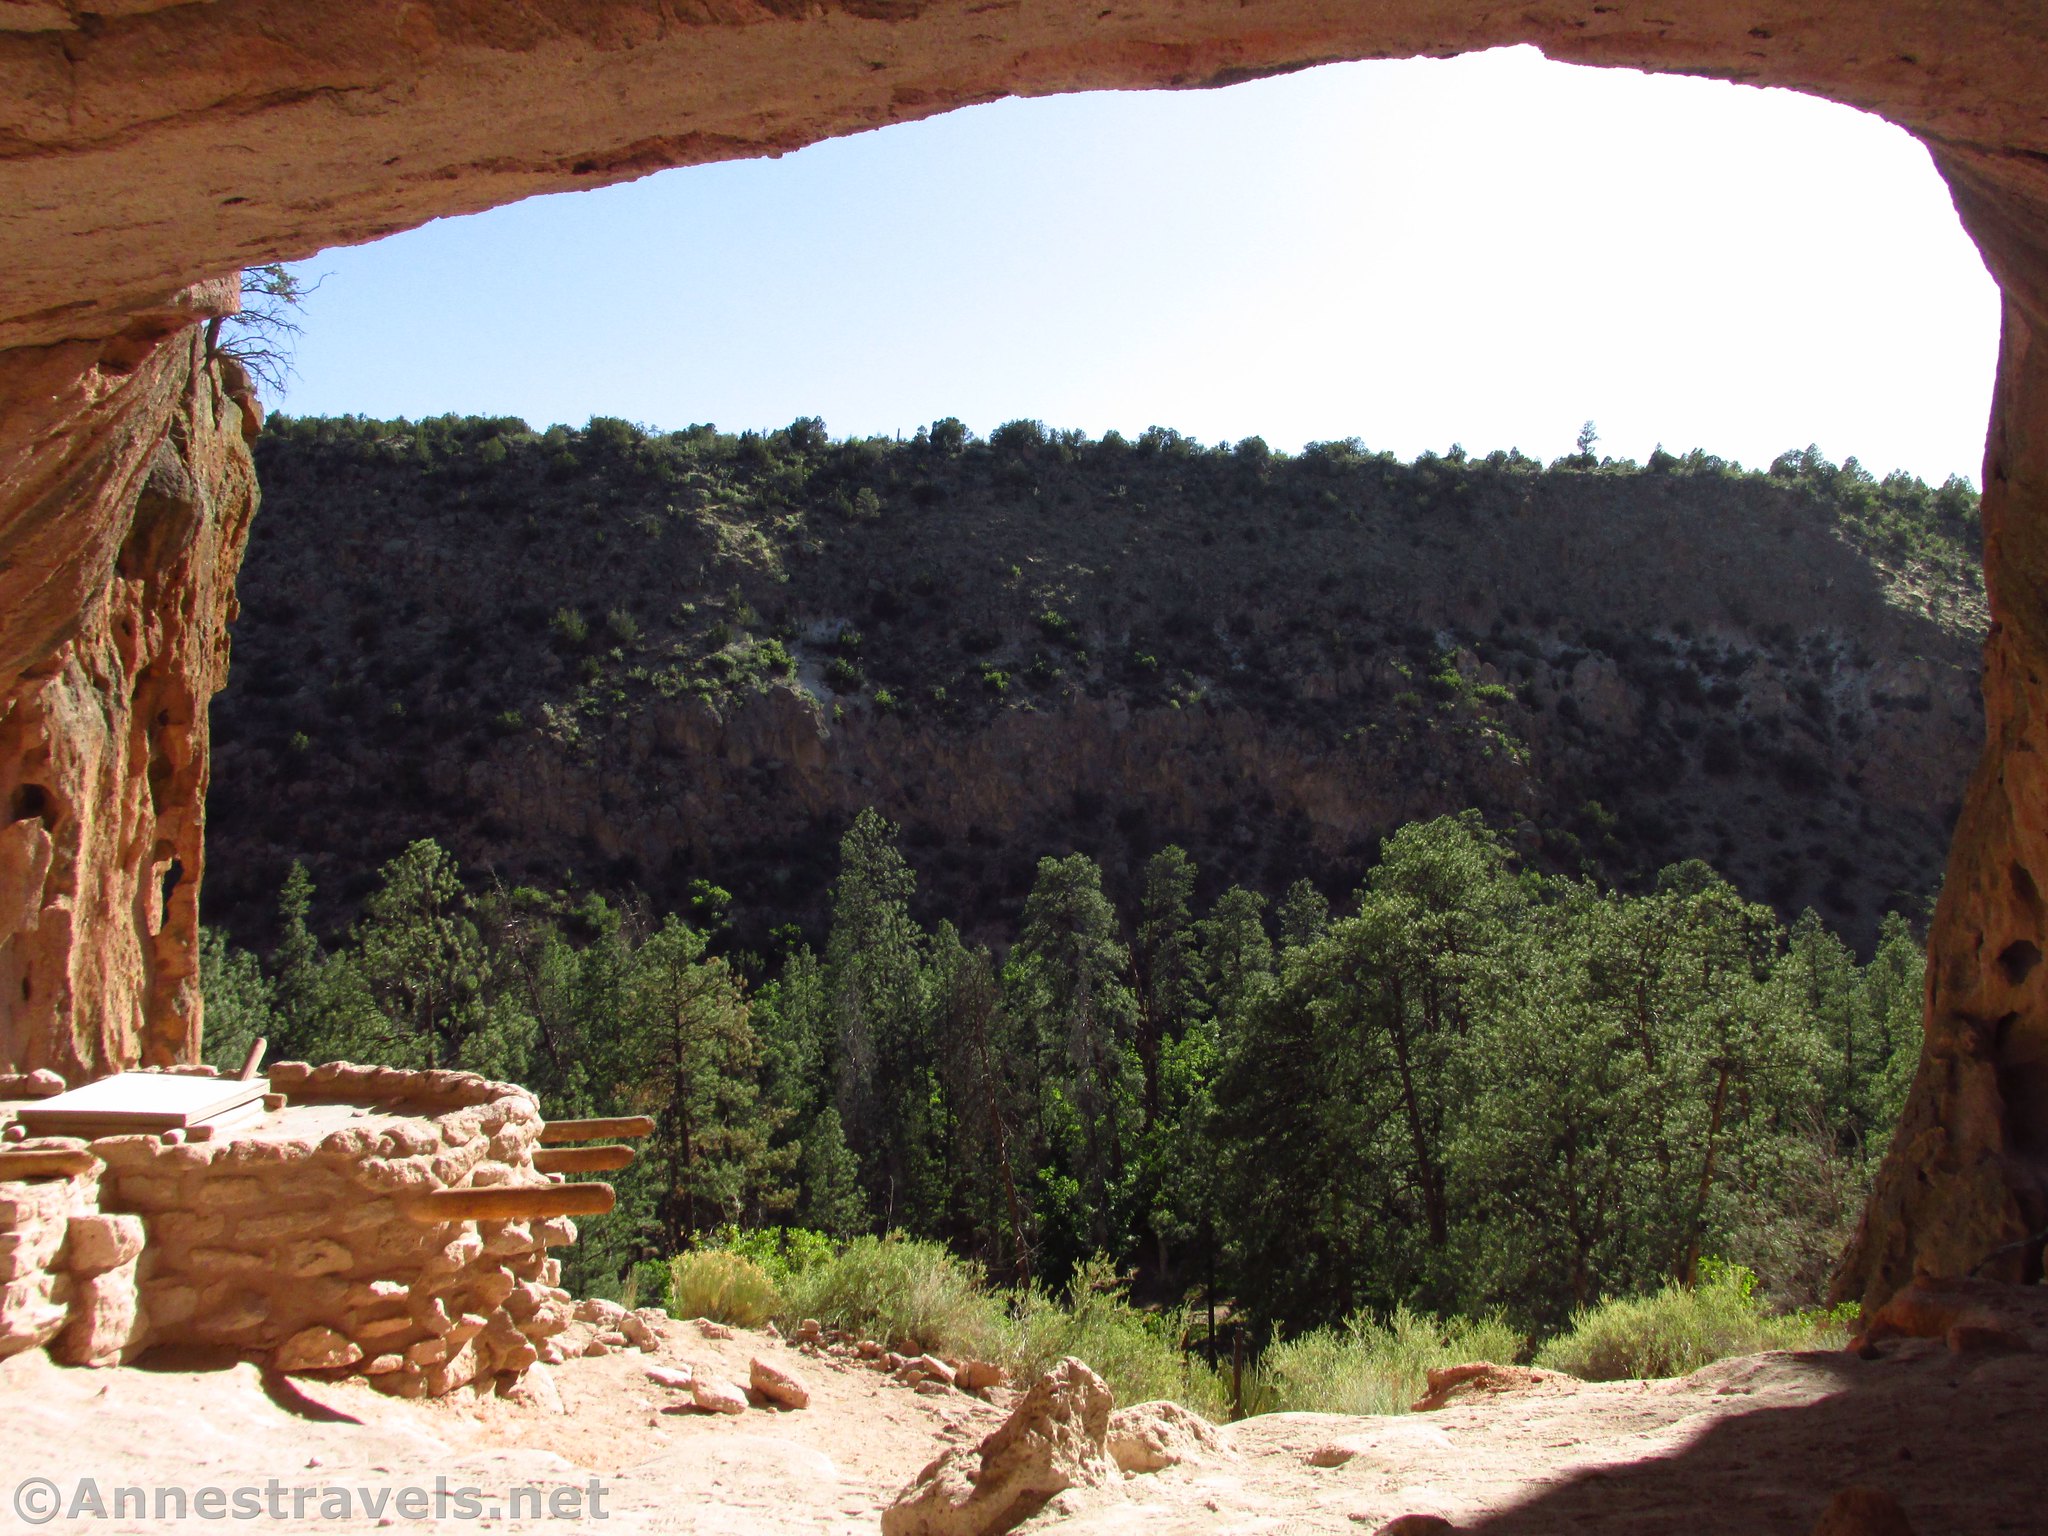 In Alcove House in Bandelier National Monument, New Mexico